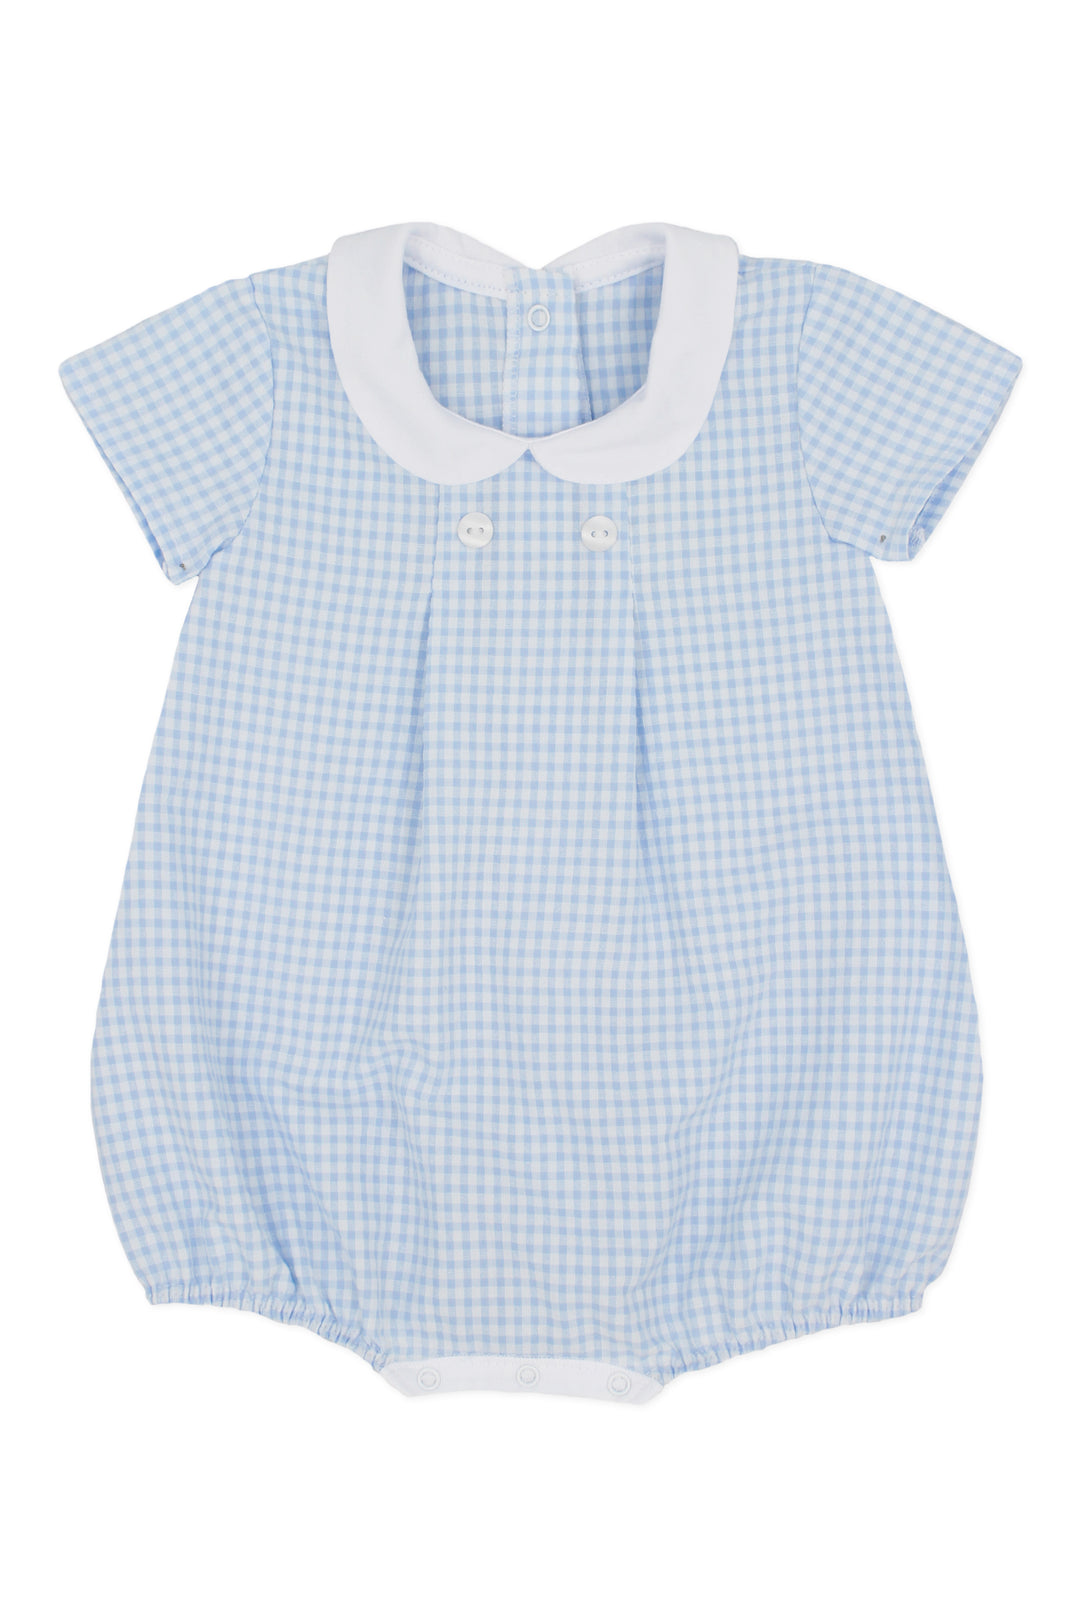 Rapife "Percy" Blue Gingham Romper | Millie and John